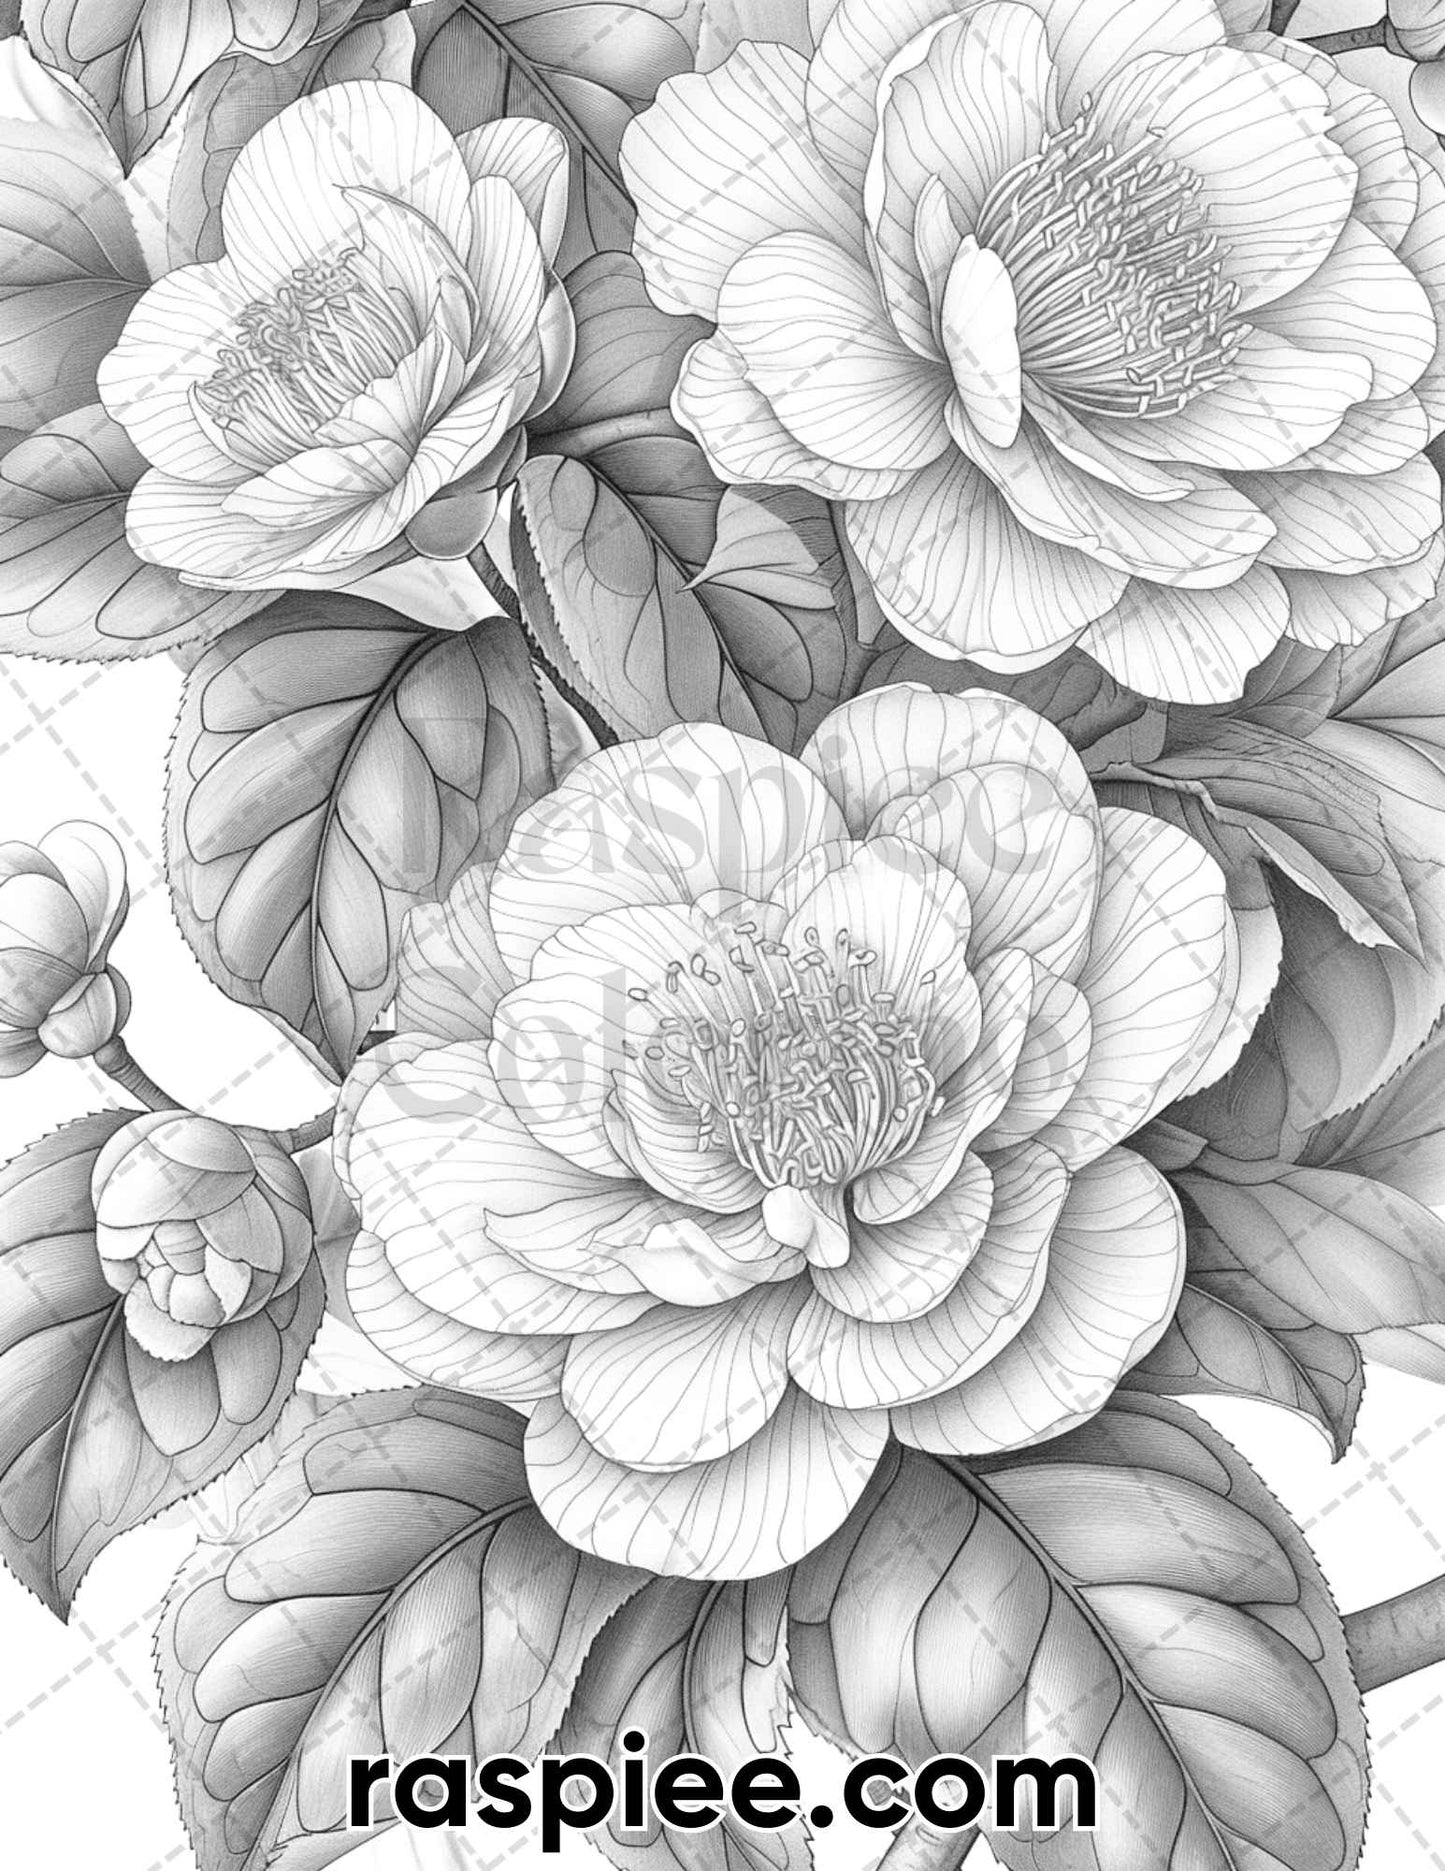 adult coloring pages, adult coloring sheets, adult coloring book pdf, adult coloring book printable, grayscale coloring pages, grayscale coloring books, flower coloring pages for adults, flower coloring book, spring coloring pages for adults, grayscale illustration, spring coloring book